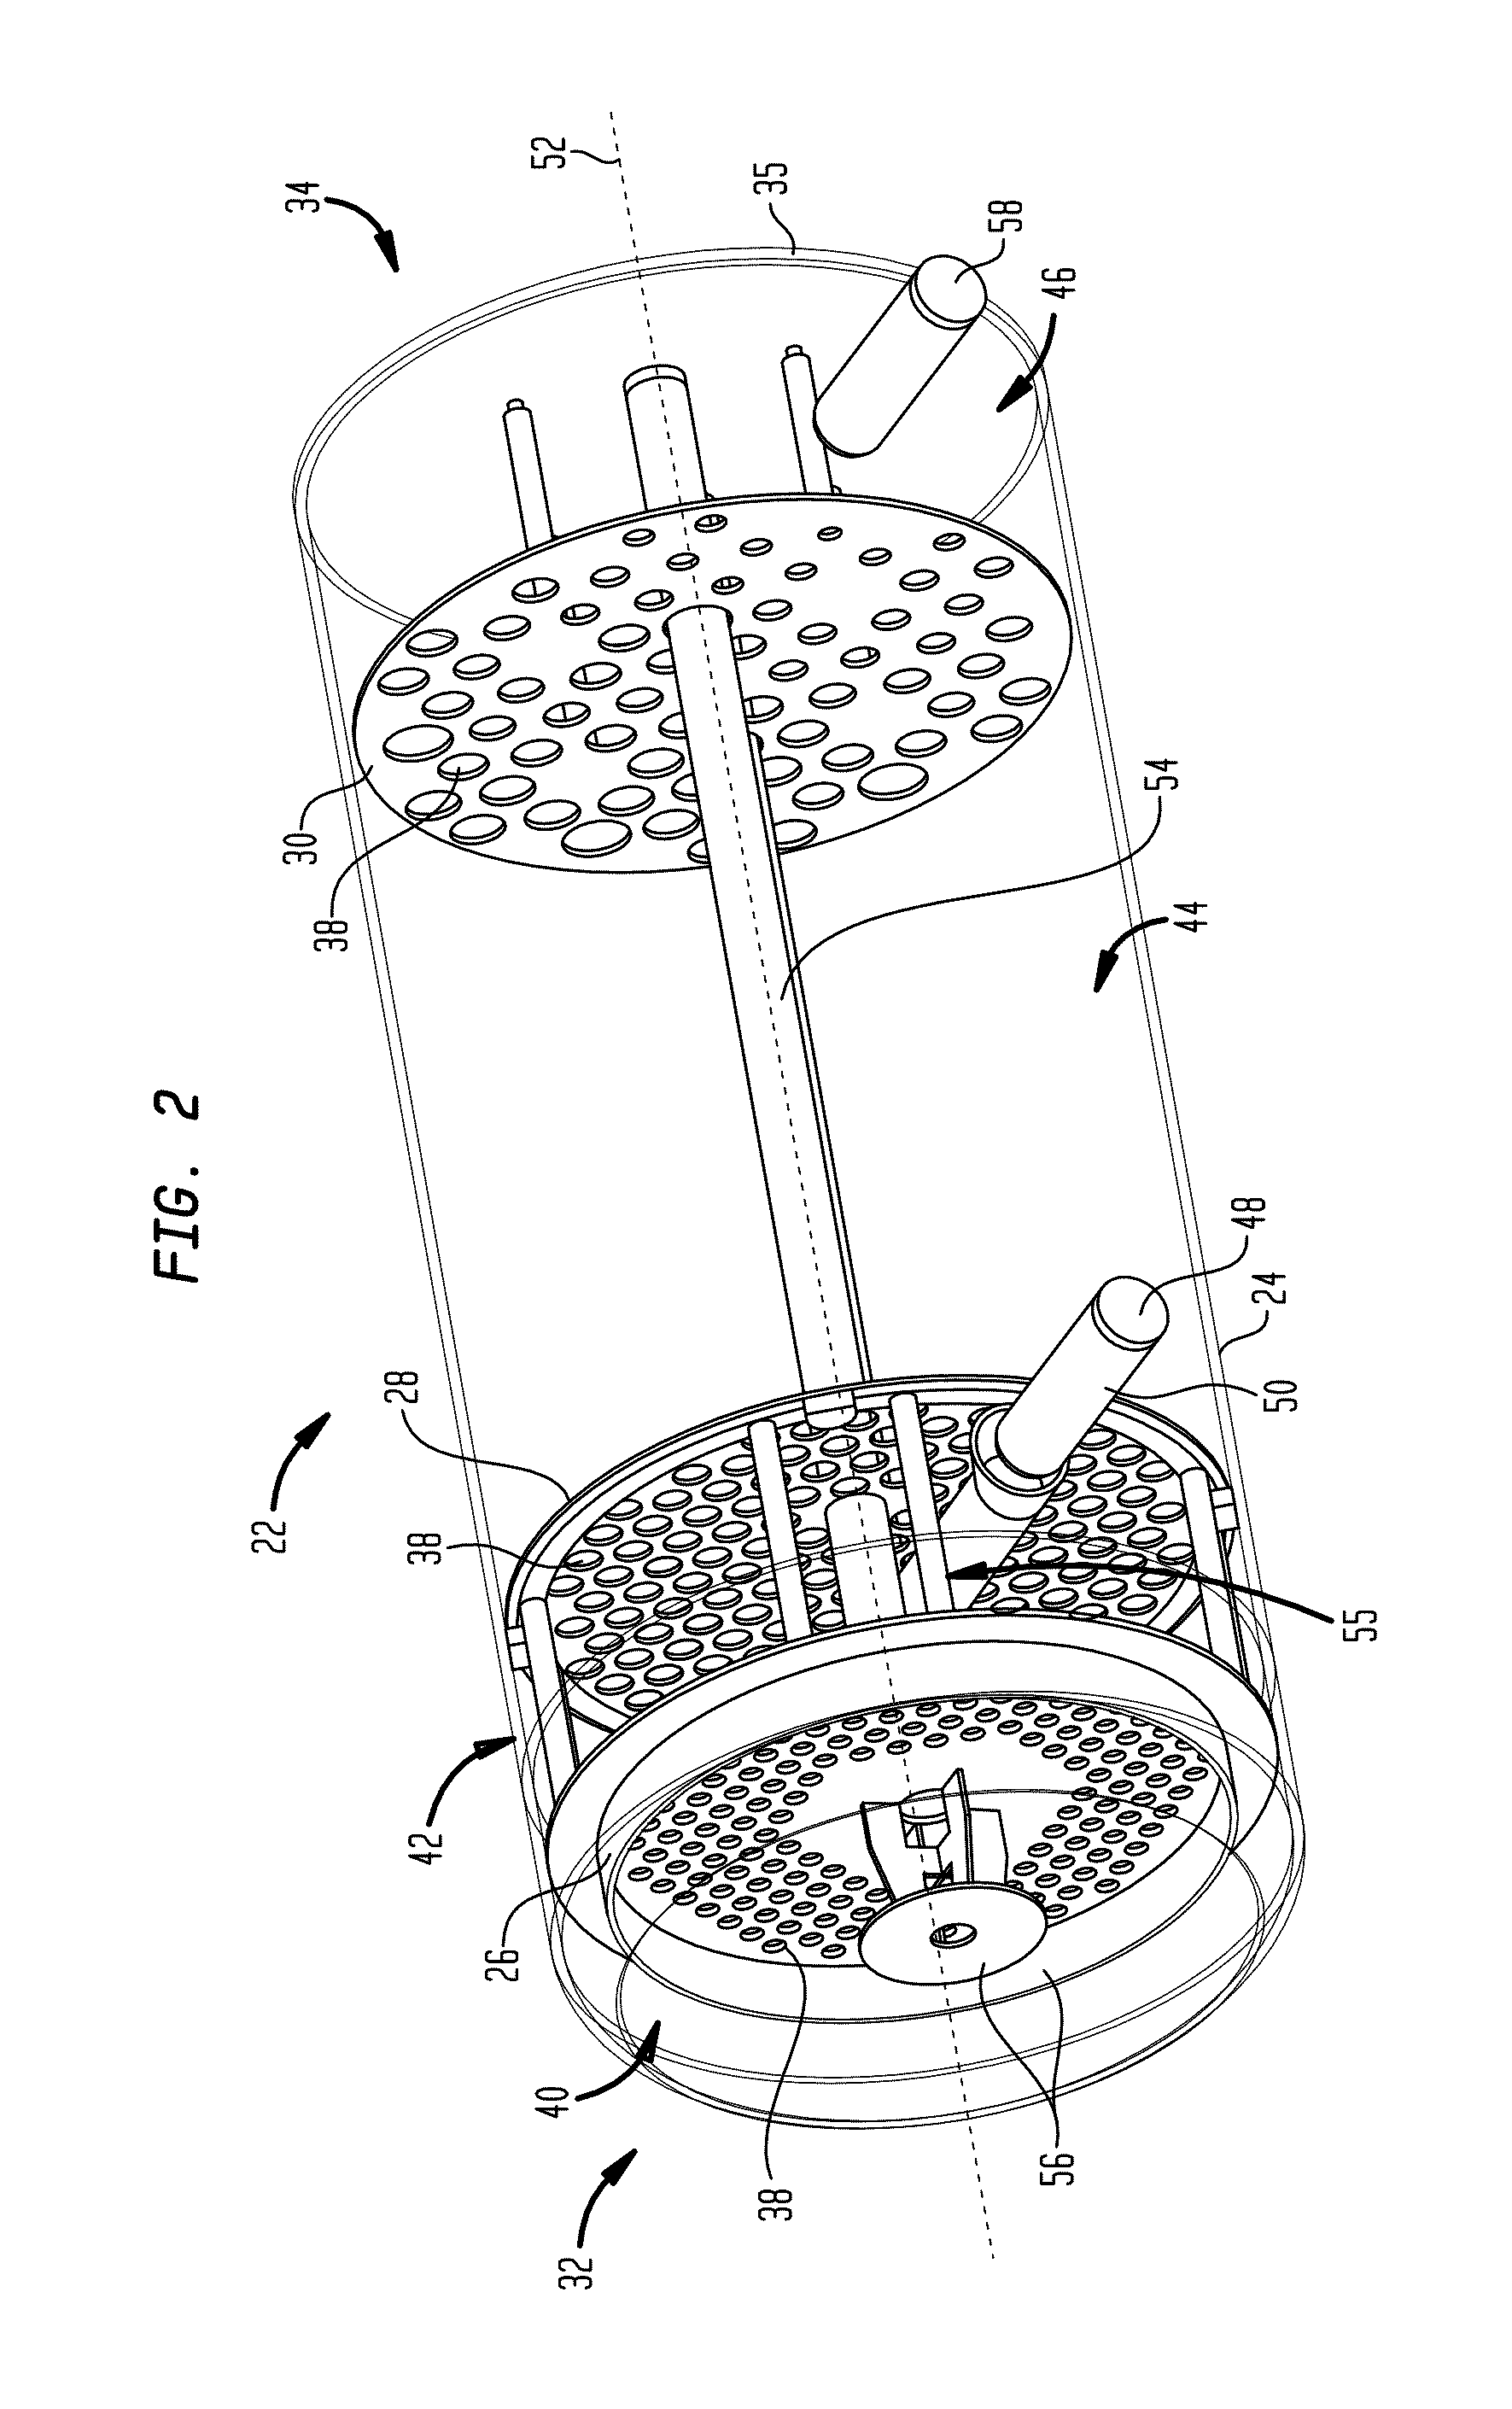 Baffle plates for an ultraviolet reactor